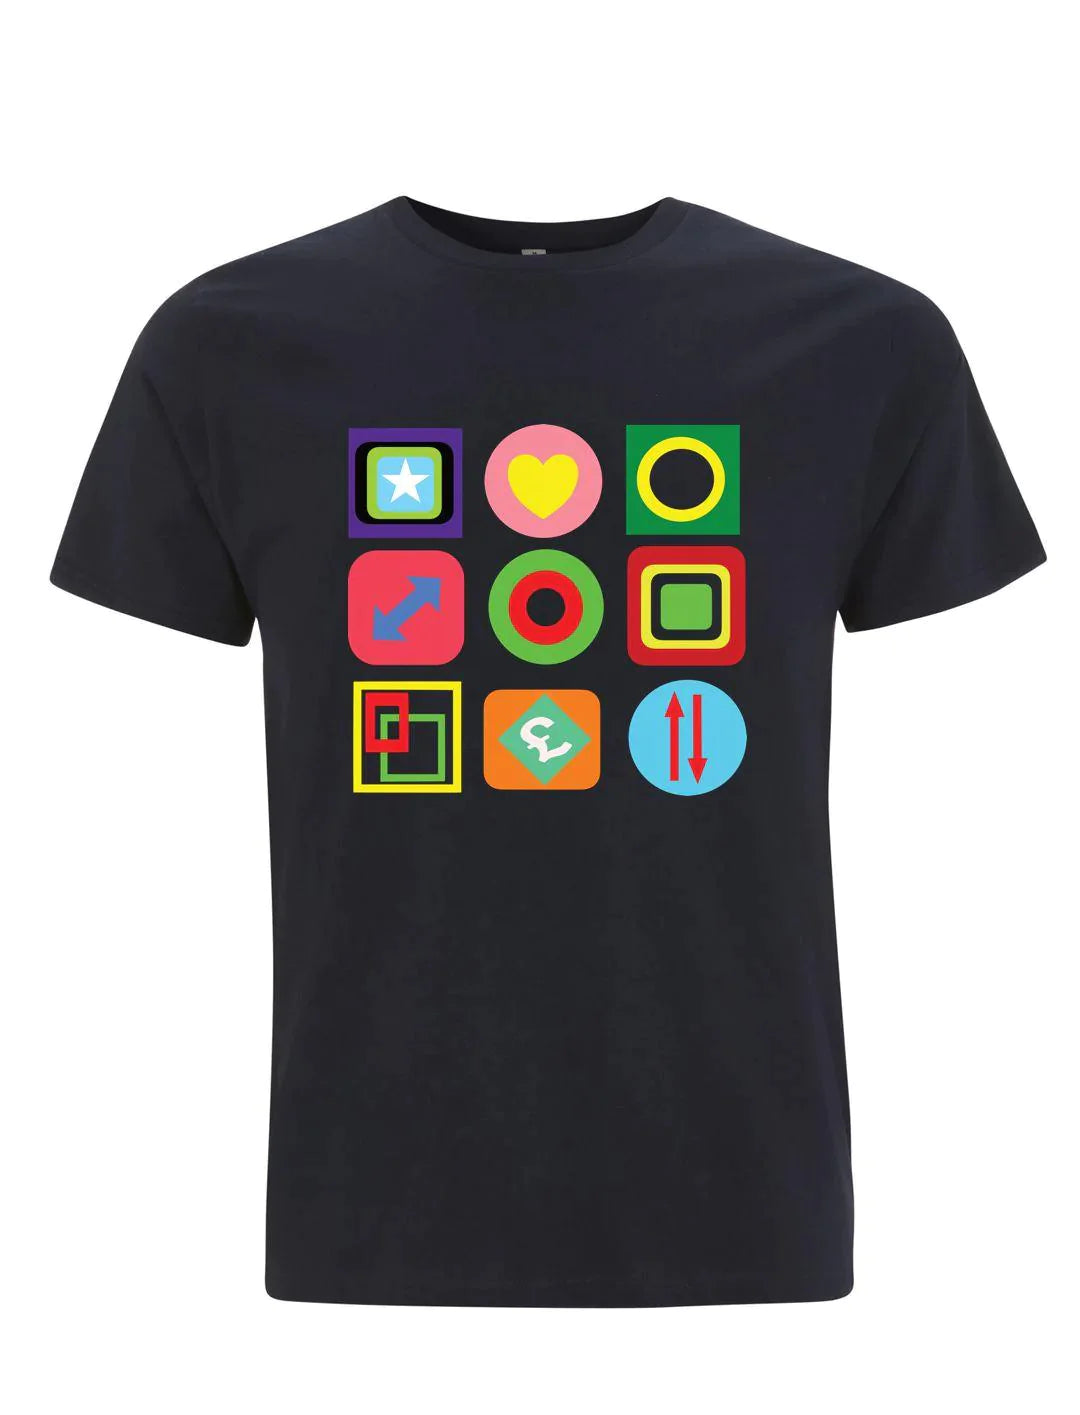 MODIFICATIONS 2: T-Shirt Inspired by Pop-Art and Peter Blake - SOUND IS COLOUR